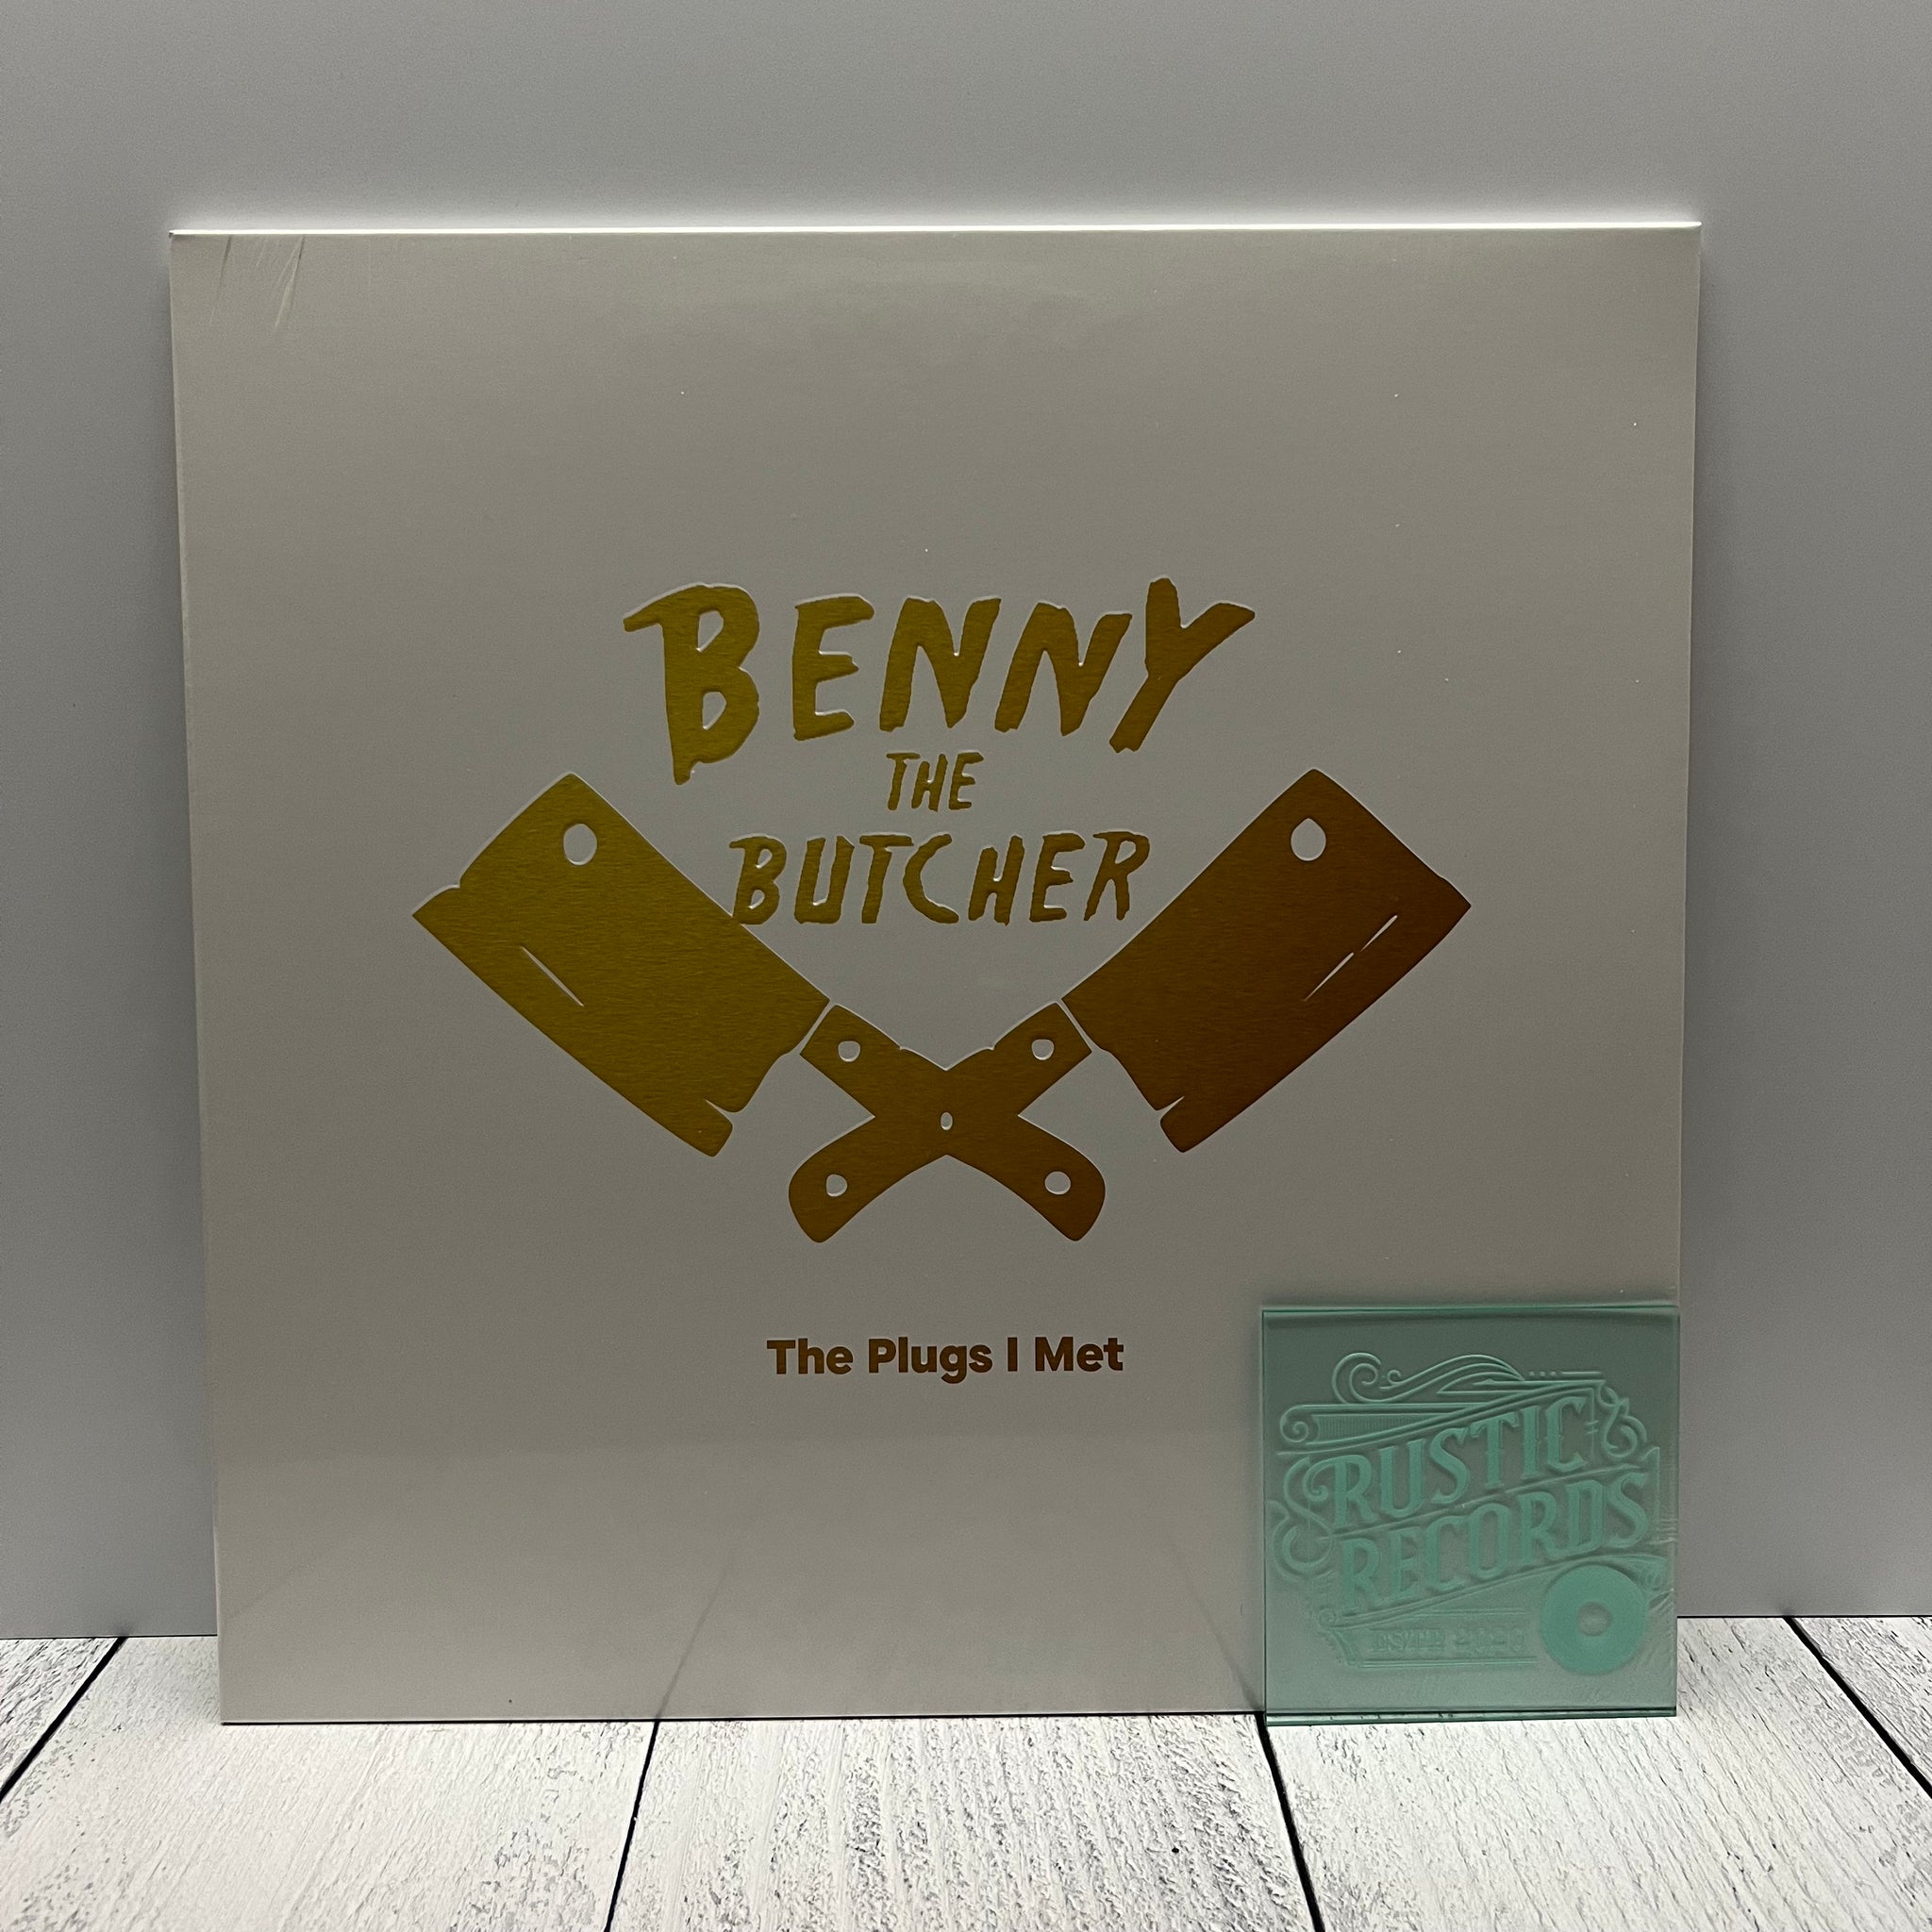 Benny The Butcher - The Plugs I Met Rustic Records